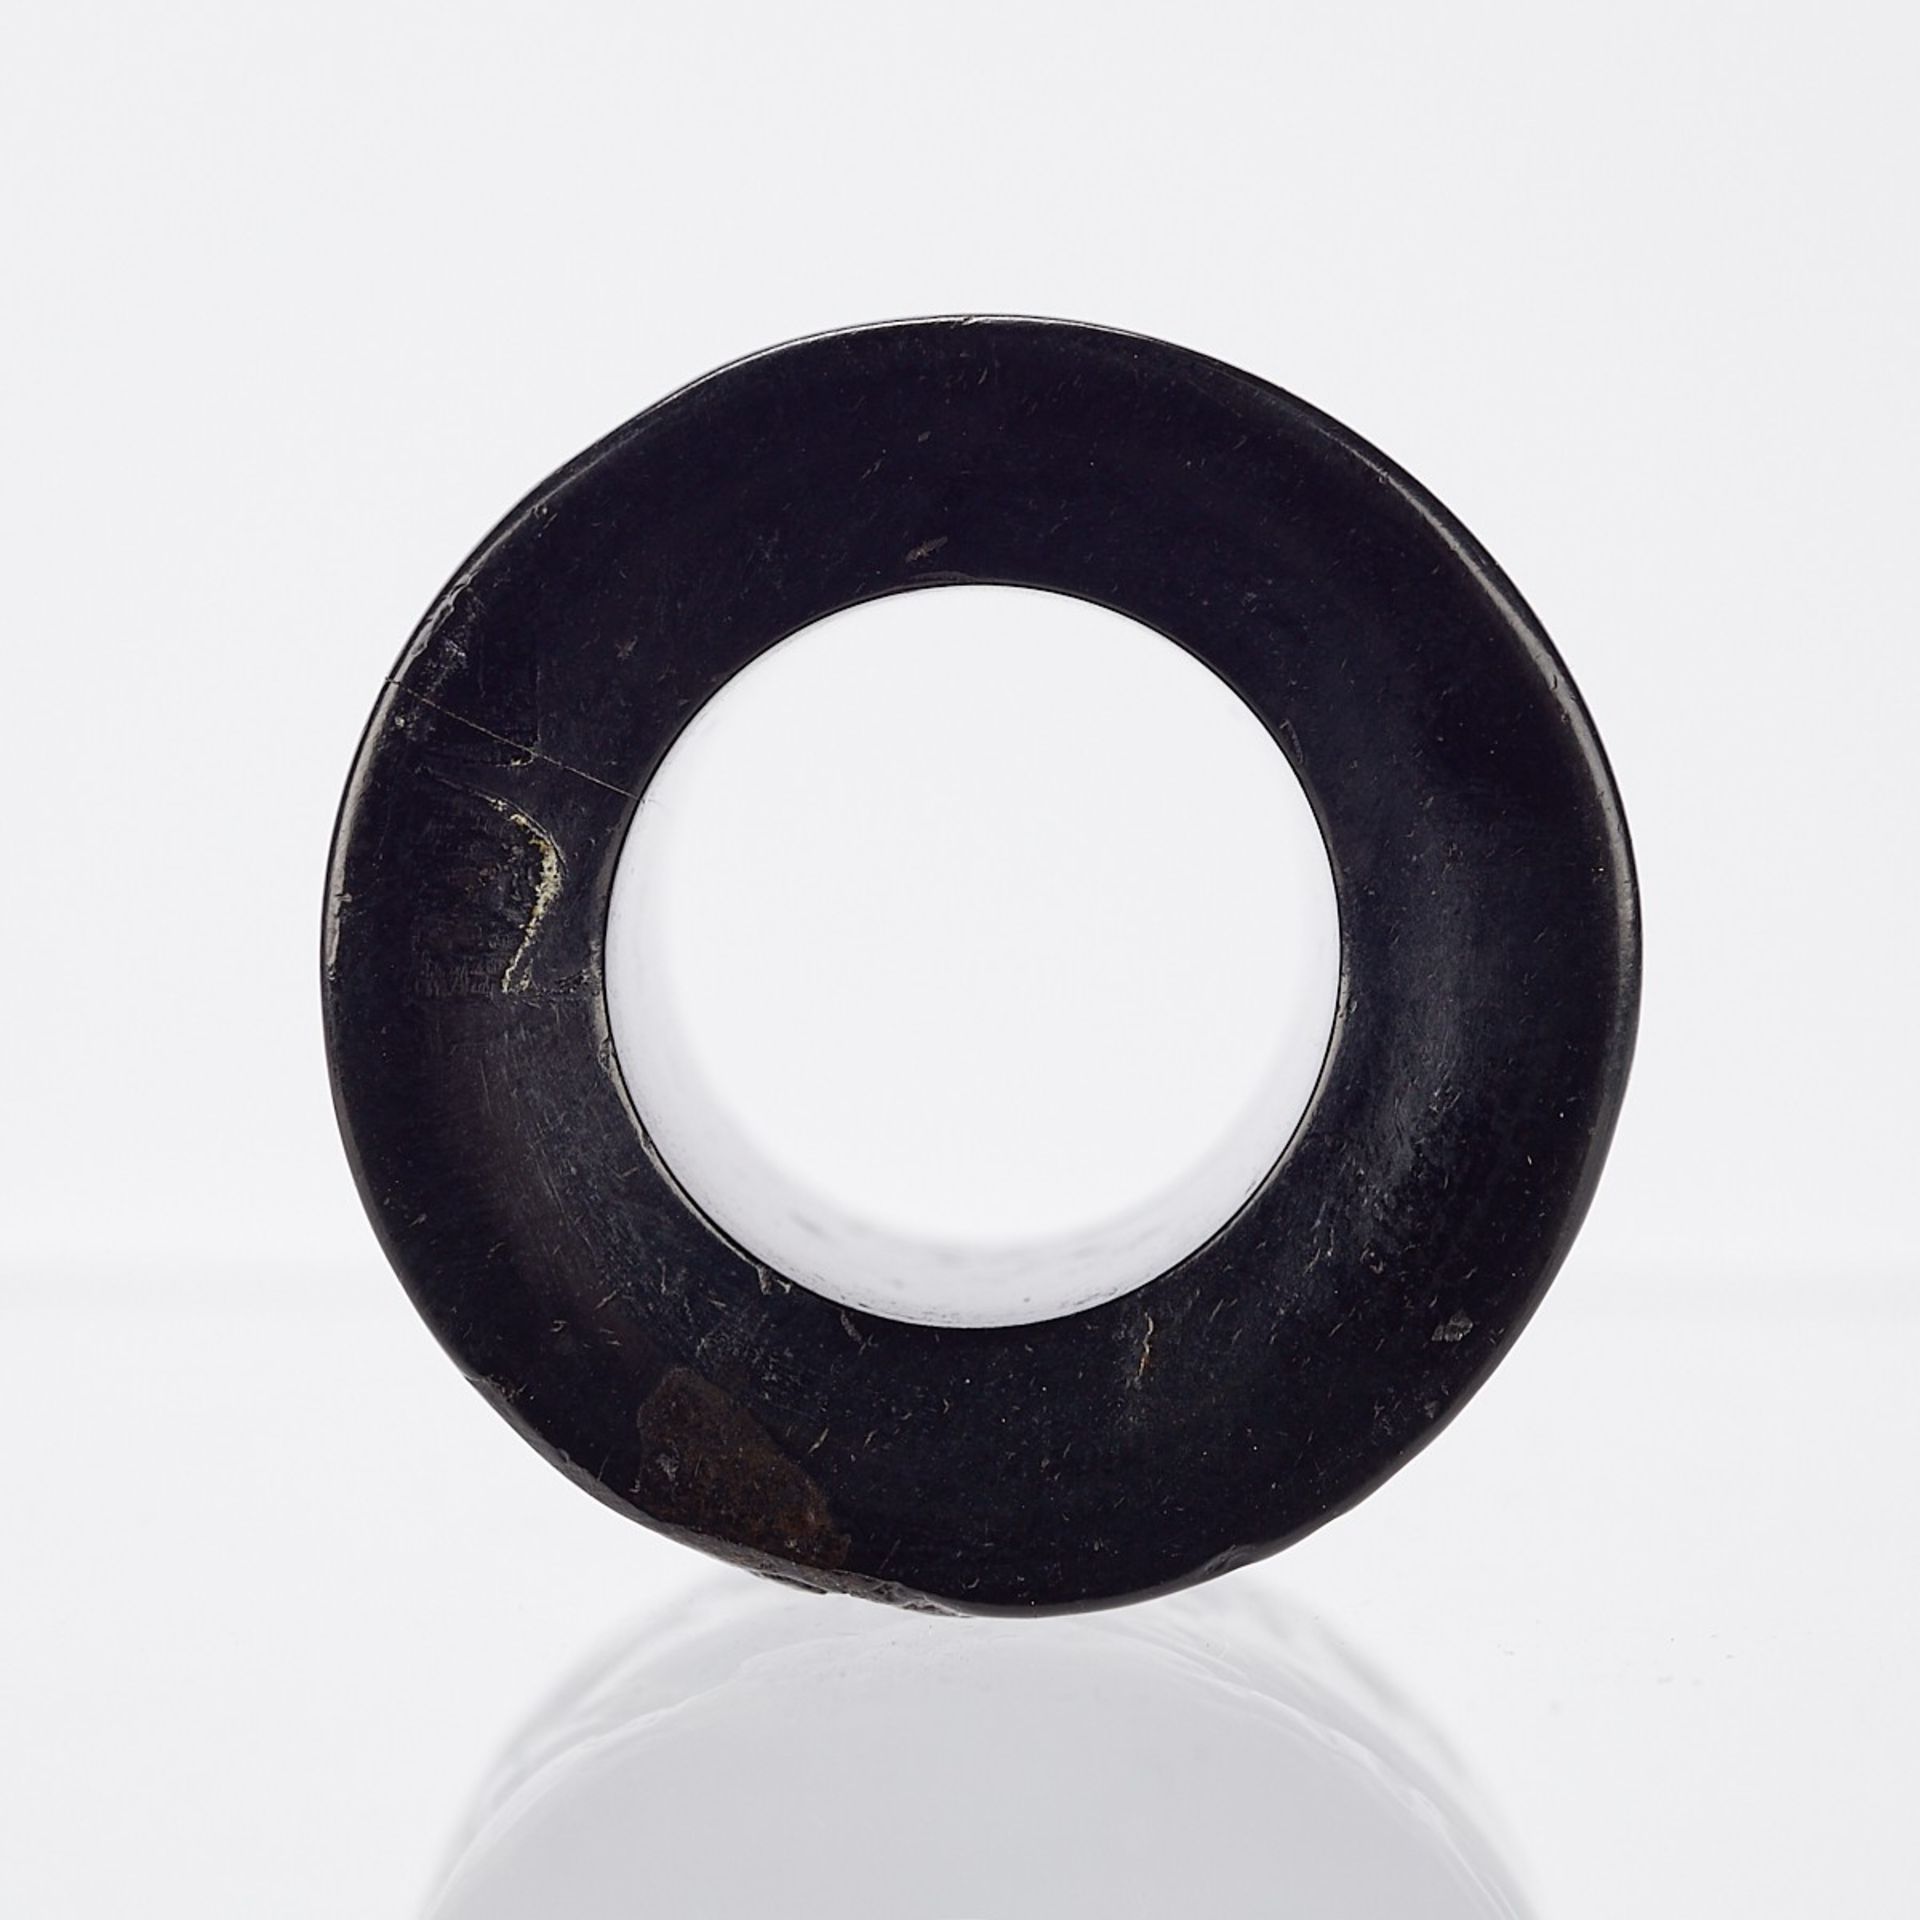 Chinese Carved Wood Archery Ring w/ Rams - Image 5 of 6